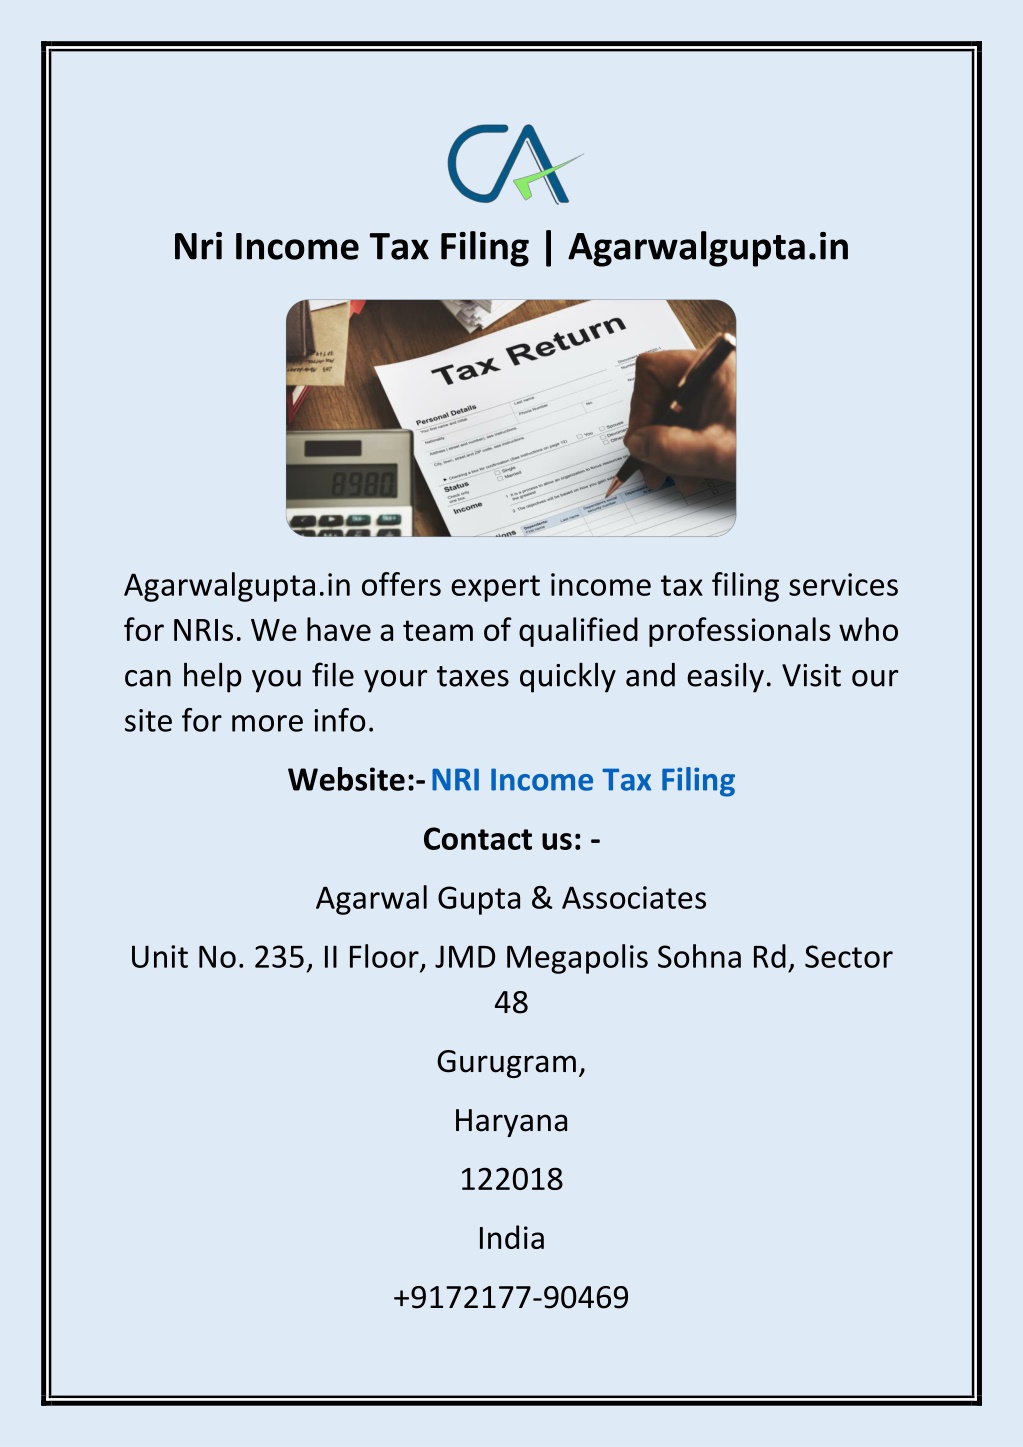 Ppt Nri Income Tax Filing Powerpoint Presentation Free Download Id11893899 